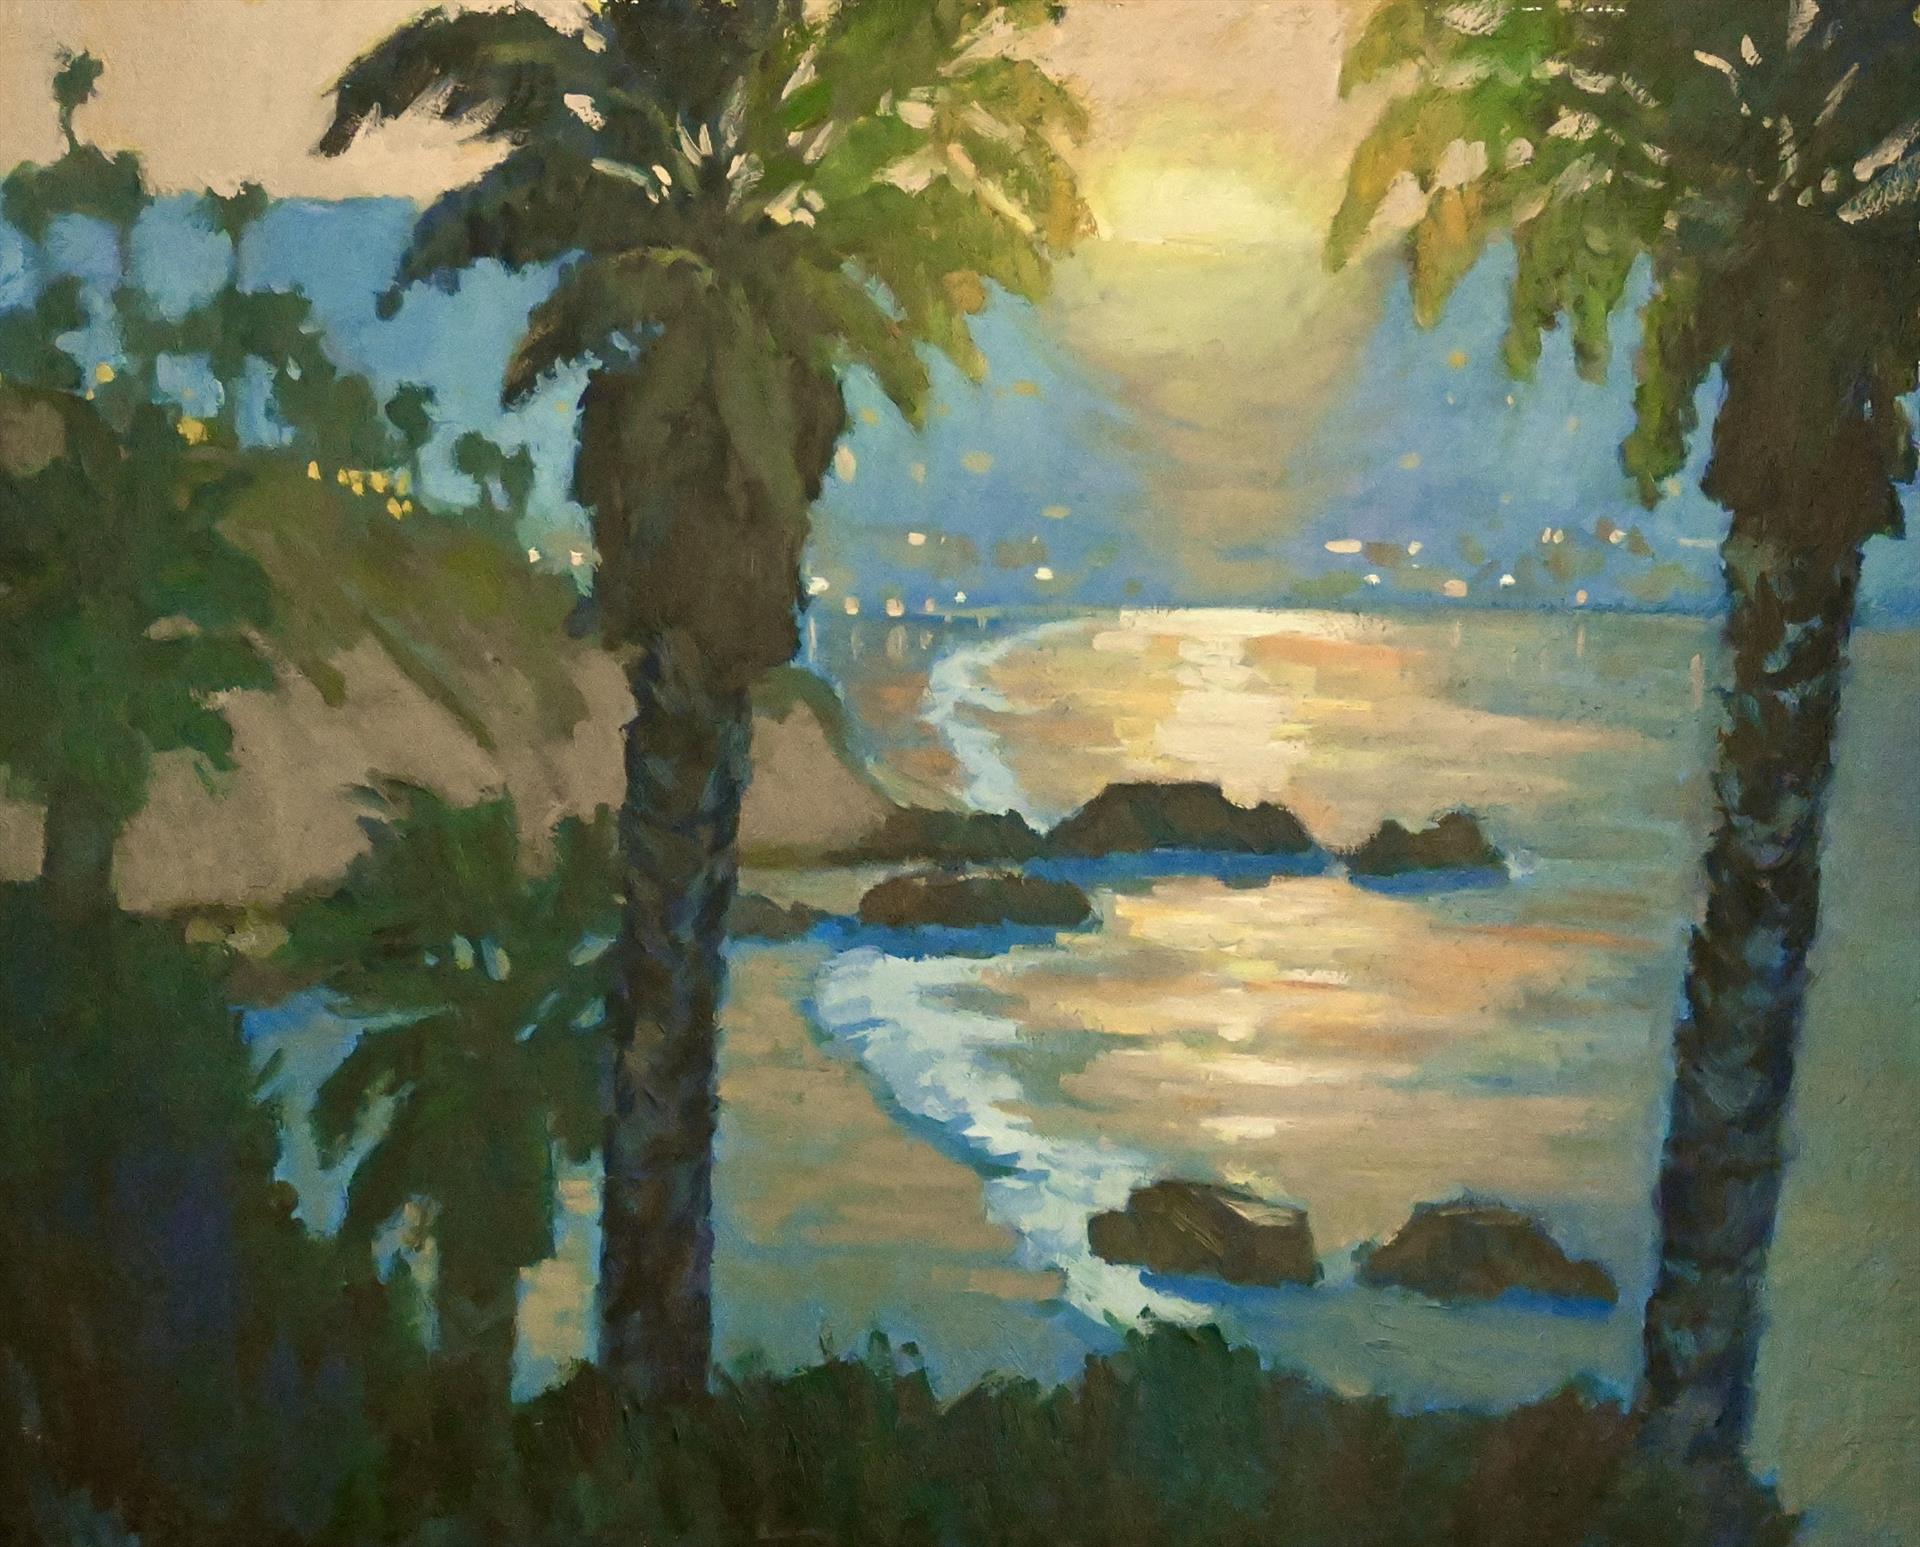 plein air painting - Second Place: "Morning Glow" (oil, 16 x 20 in.) by Mark Fehlman